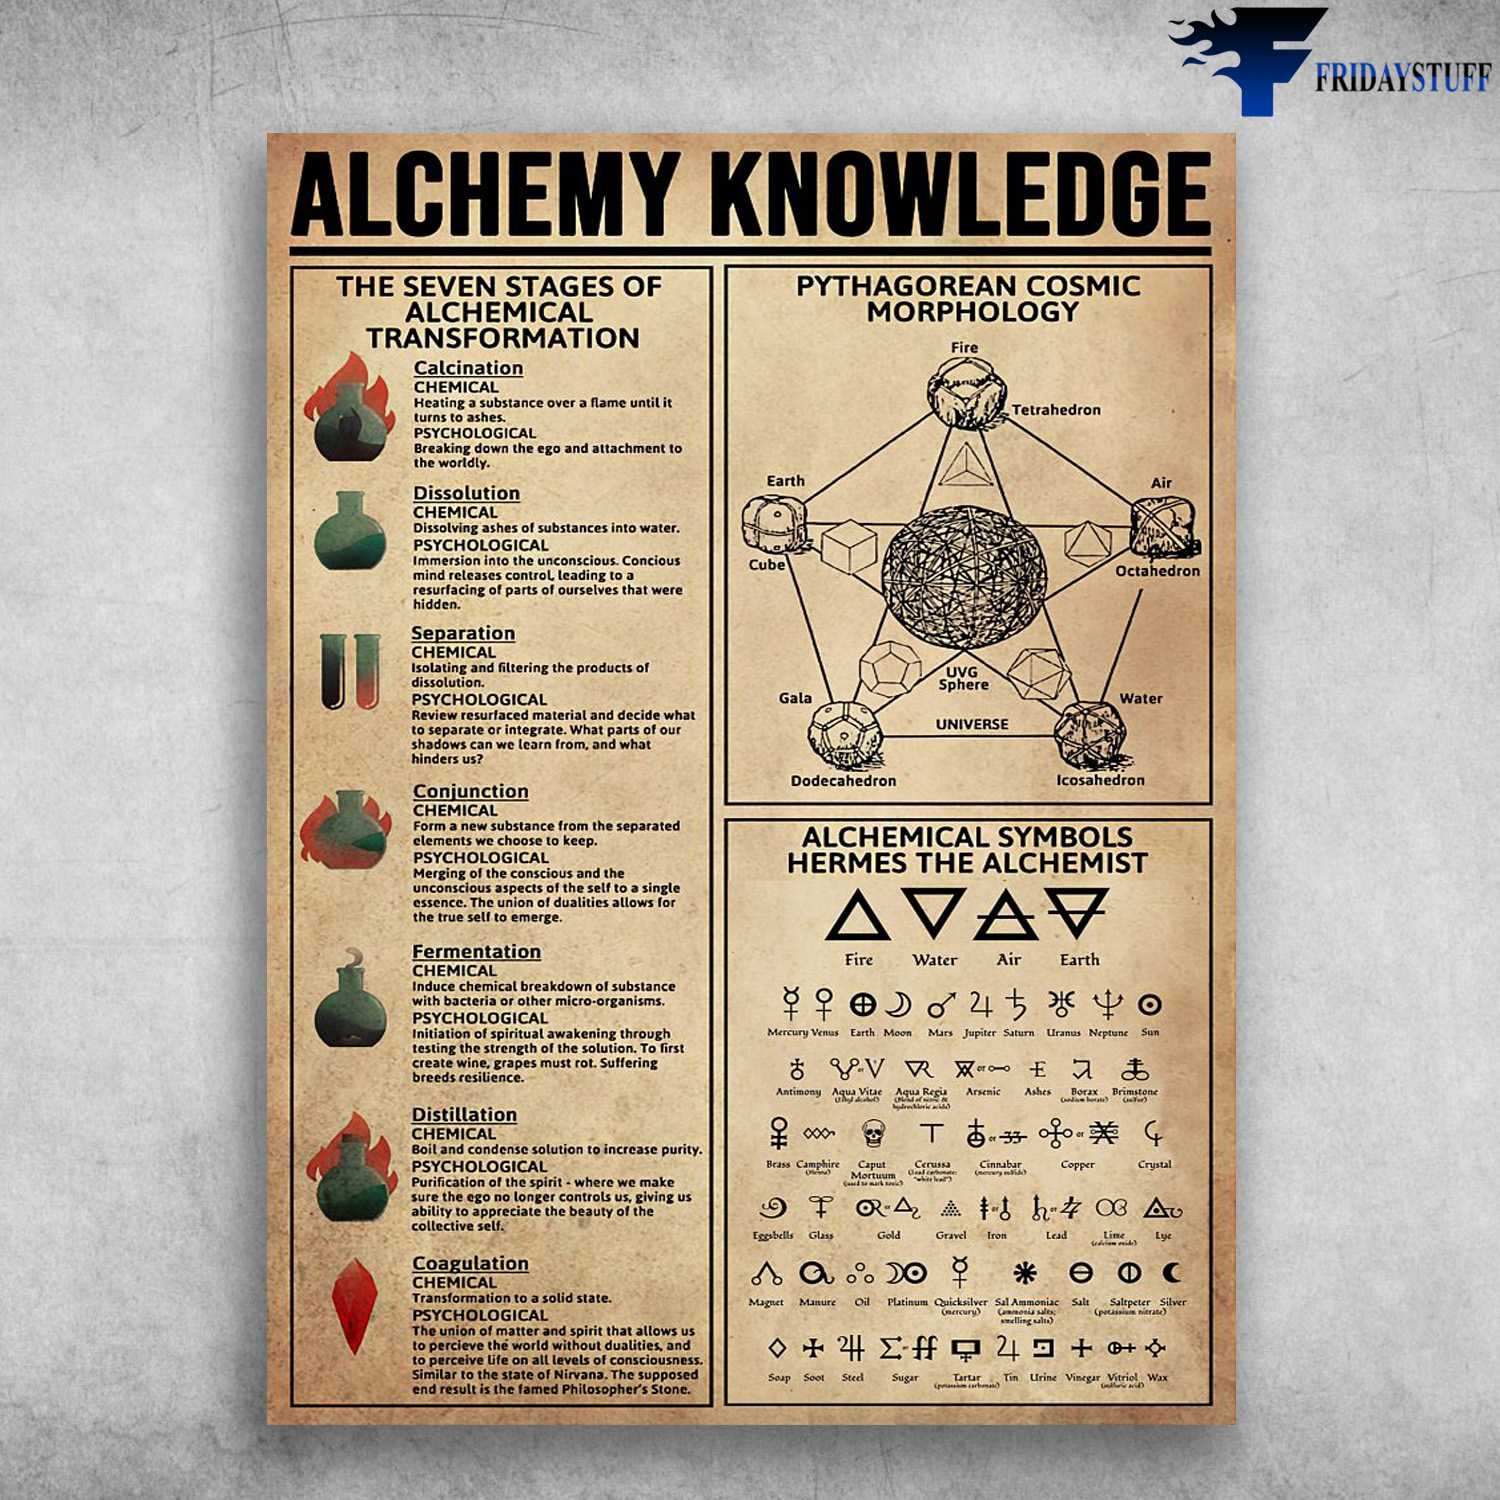 Alchemy Knowledge, The Seven Stages Of Alchemical Transformation, Pythagorean Cosmic Morphology, Alchemical Symbols Hermes The Alchemist